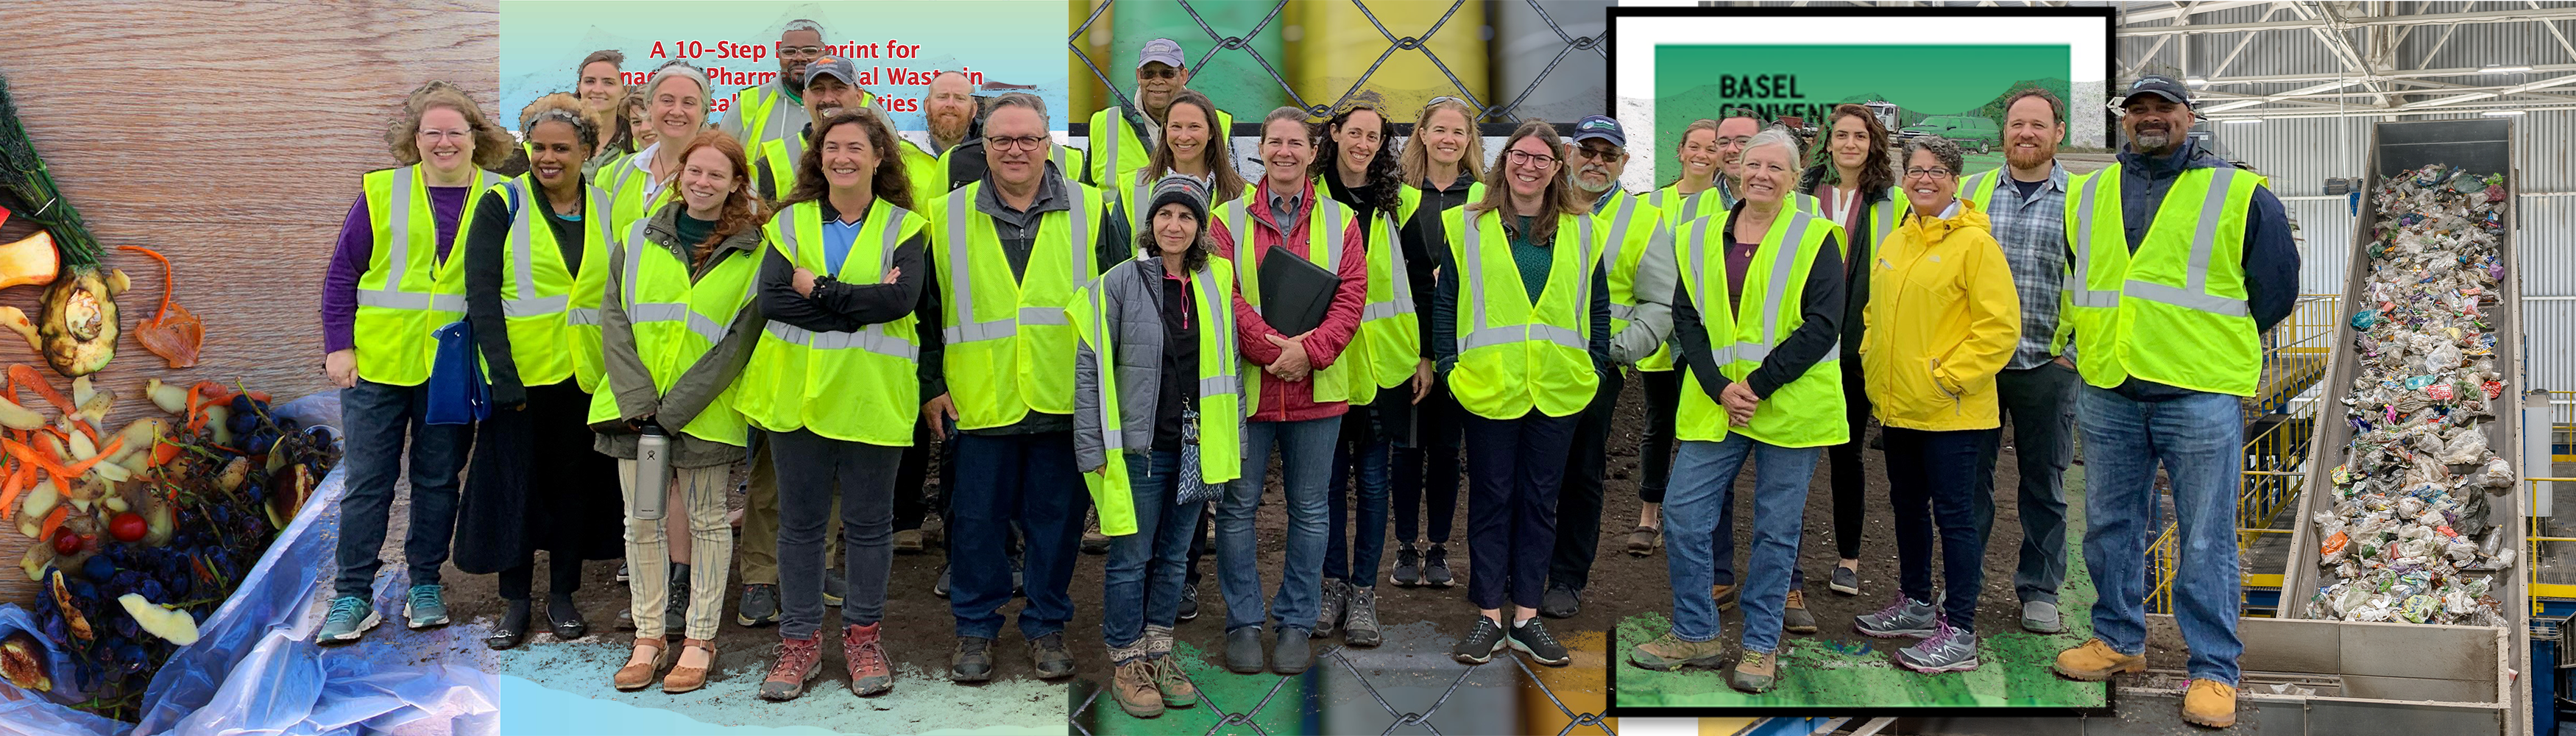 a spliced together banner image showing most prominently a gathering of about 25 EPA employees during a visit to a composting facility. Other images behind that one are that of reports covers, a recucling facility, food waste on the floor, and barrels of hazardous waste.